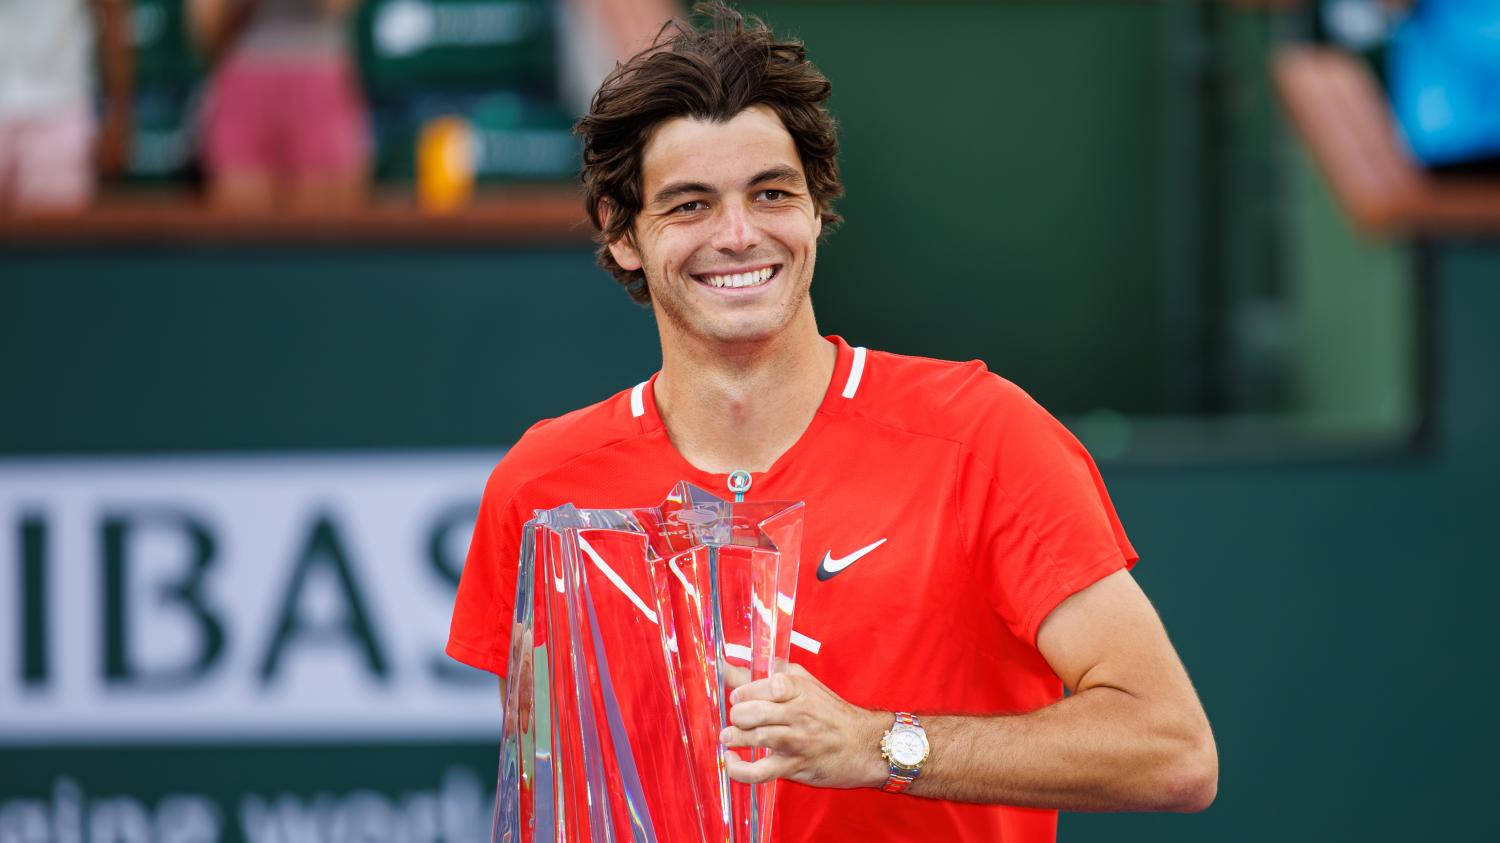 Professional Tennis Player Taylor Fritz lifting the tennis tournament trophy Wallpaper